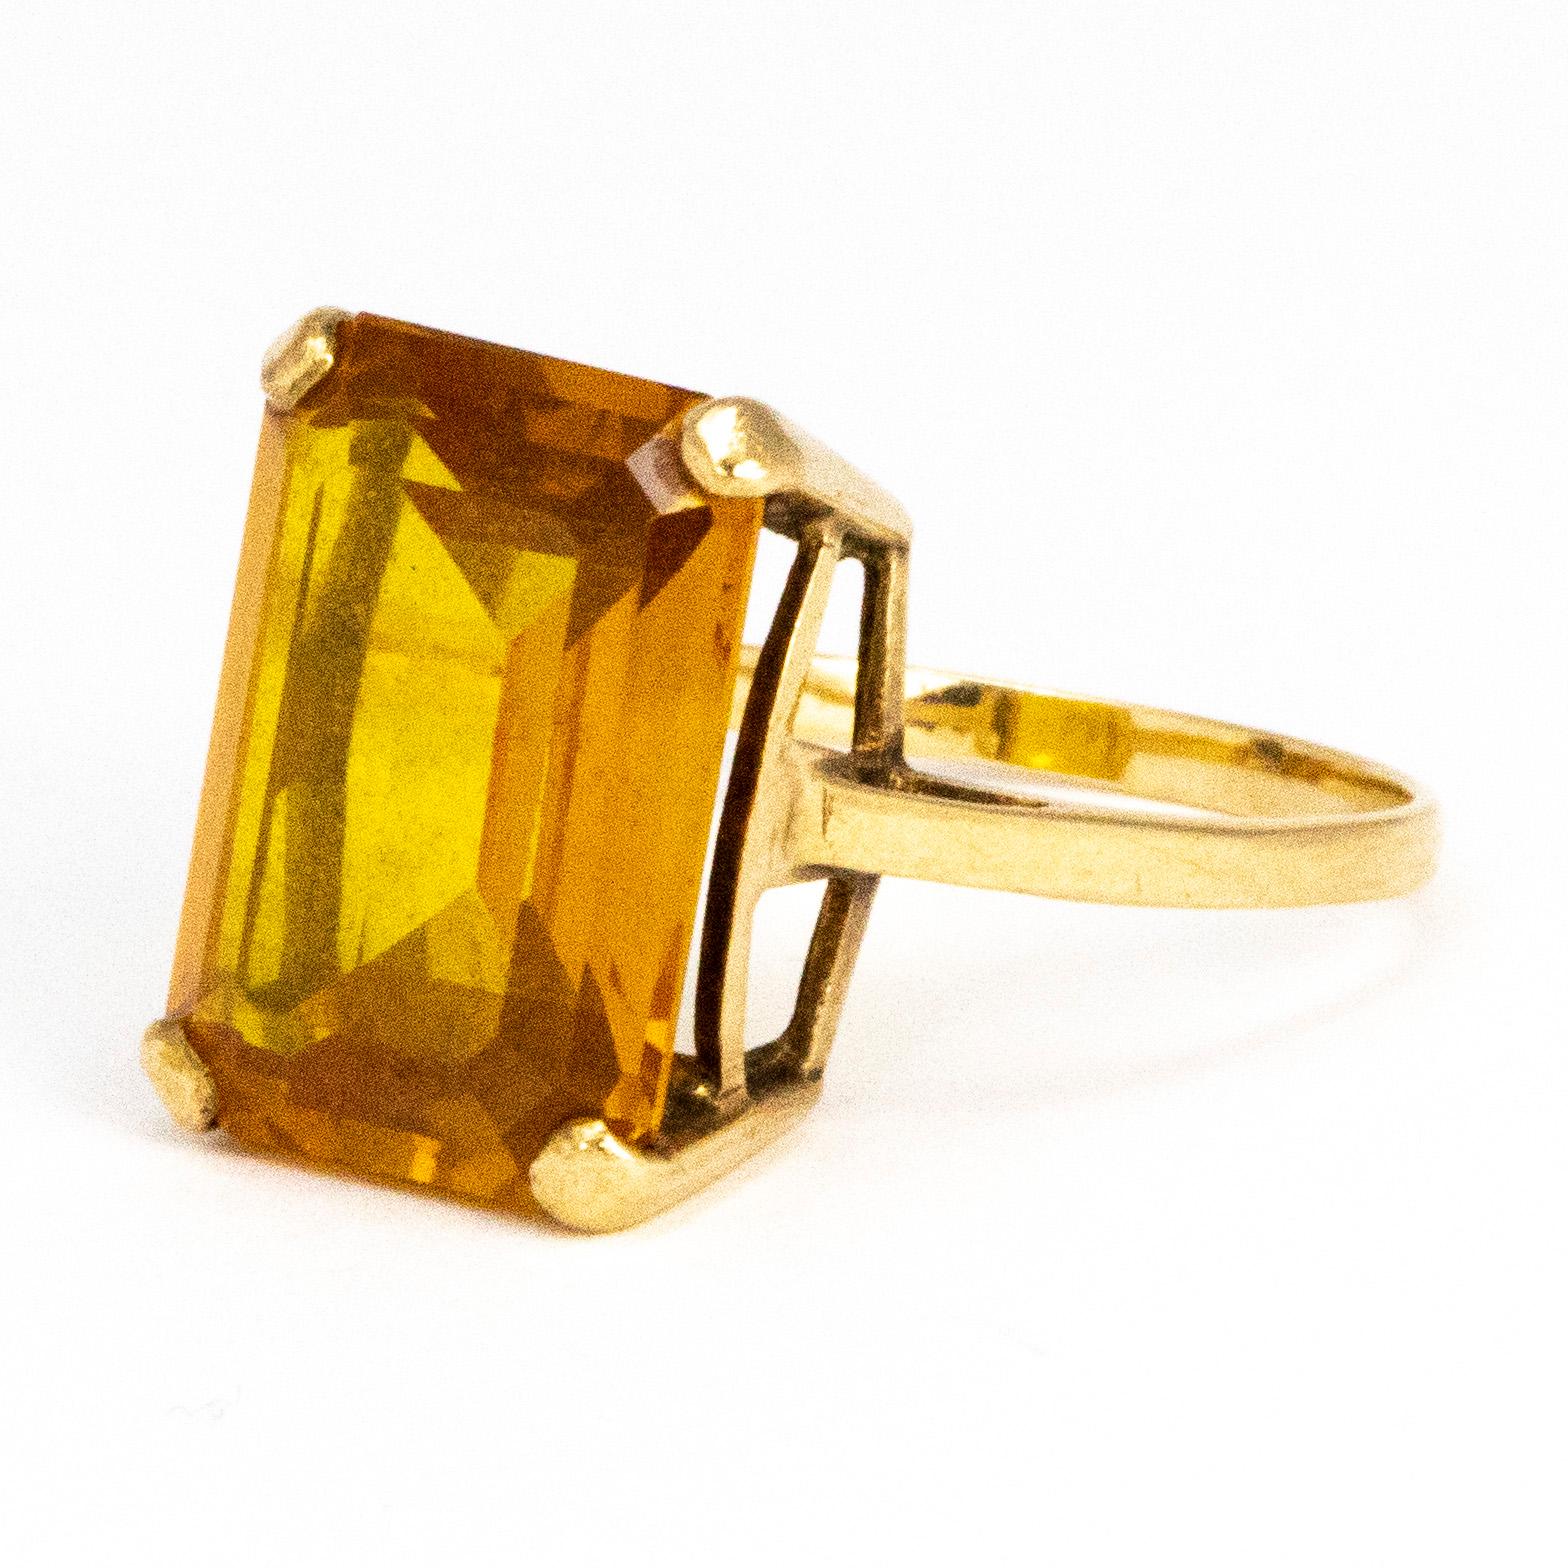 The rich coloured citrine stone is held by a very delicate claw at each corner of the stone. The rings modelled in 9ct gold and the setting and ring is a very simple design. 

Ring Size: P or 7 3/4
Stone Dimensions: 12mm x 16mm 